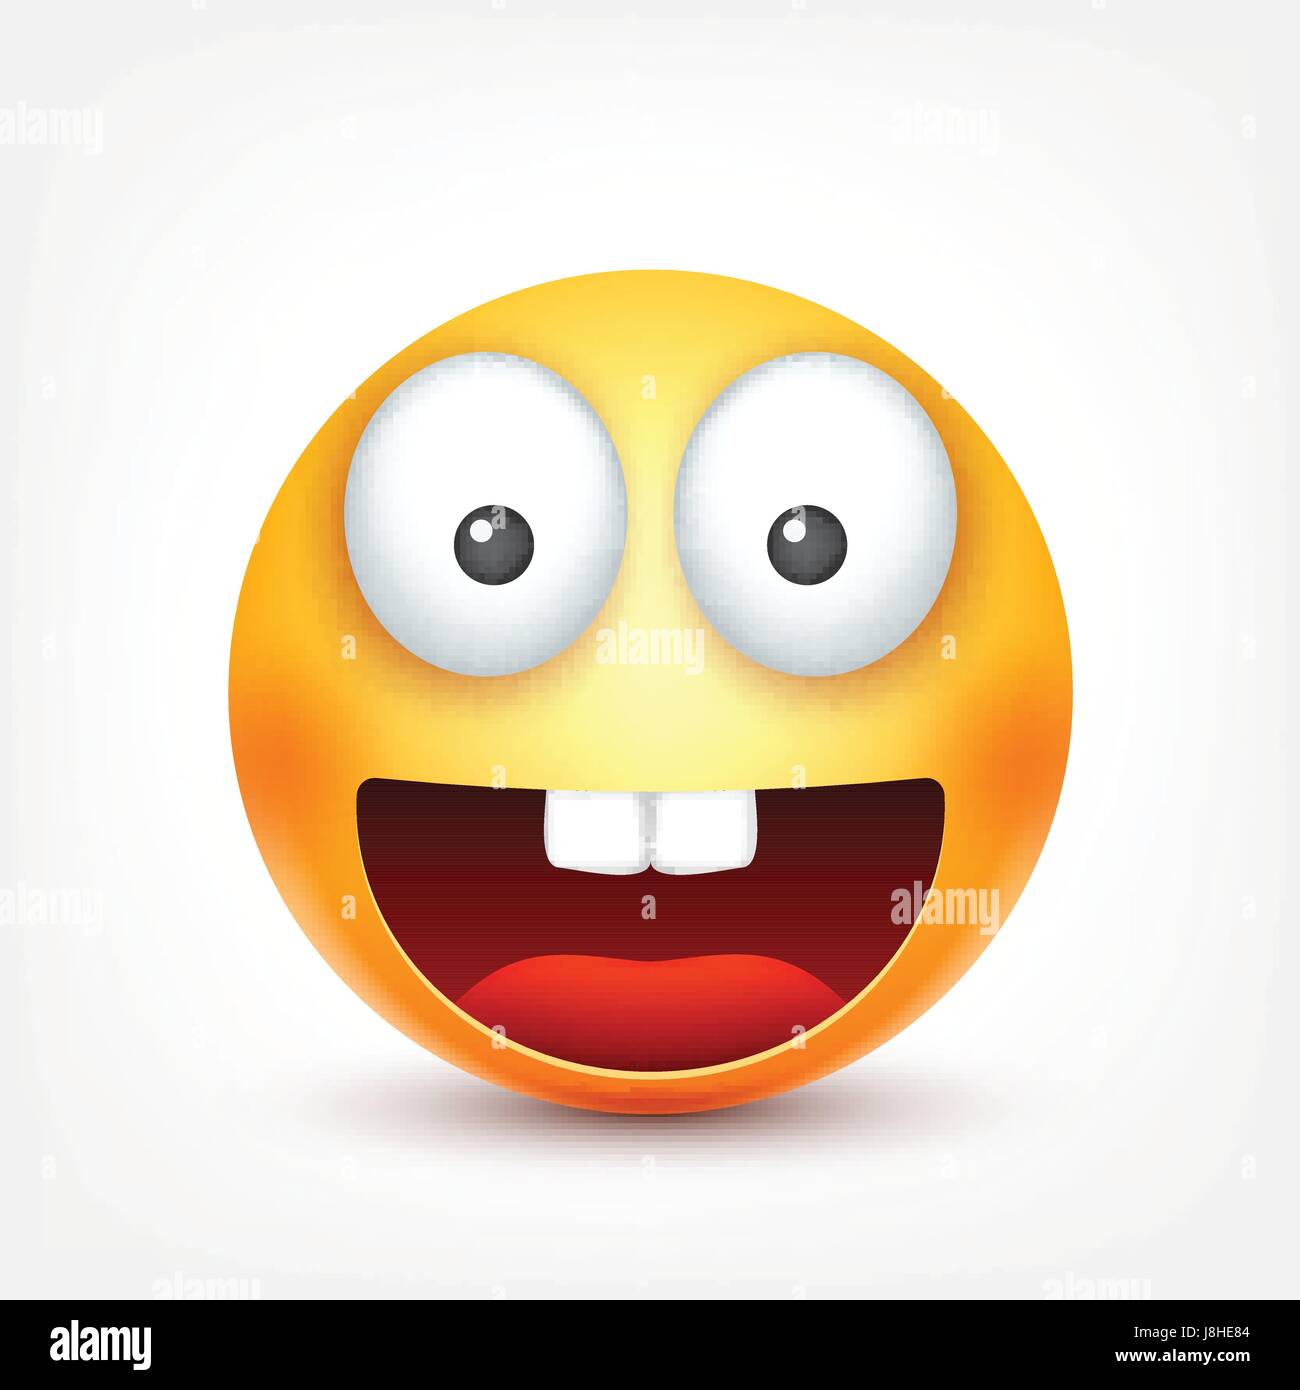 Smiley,smiling ,happy emoticon with teeth. Yellow face with emotions. Facial expression. 3d realistic emoji. Funny cartoon character.Mood. Web icon. Vector illustration. Stock Vector